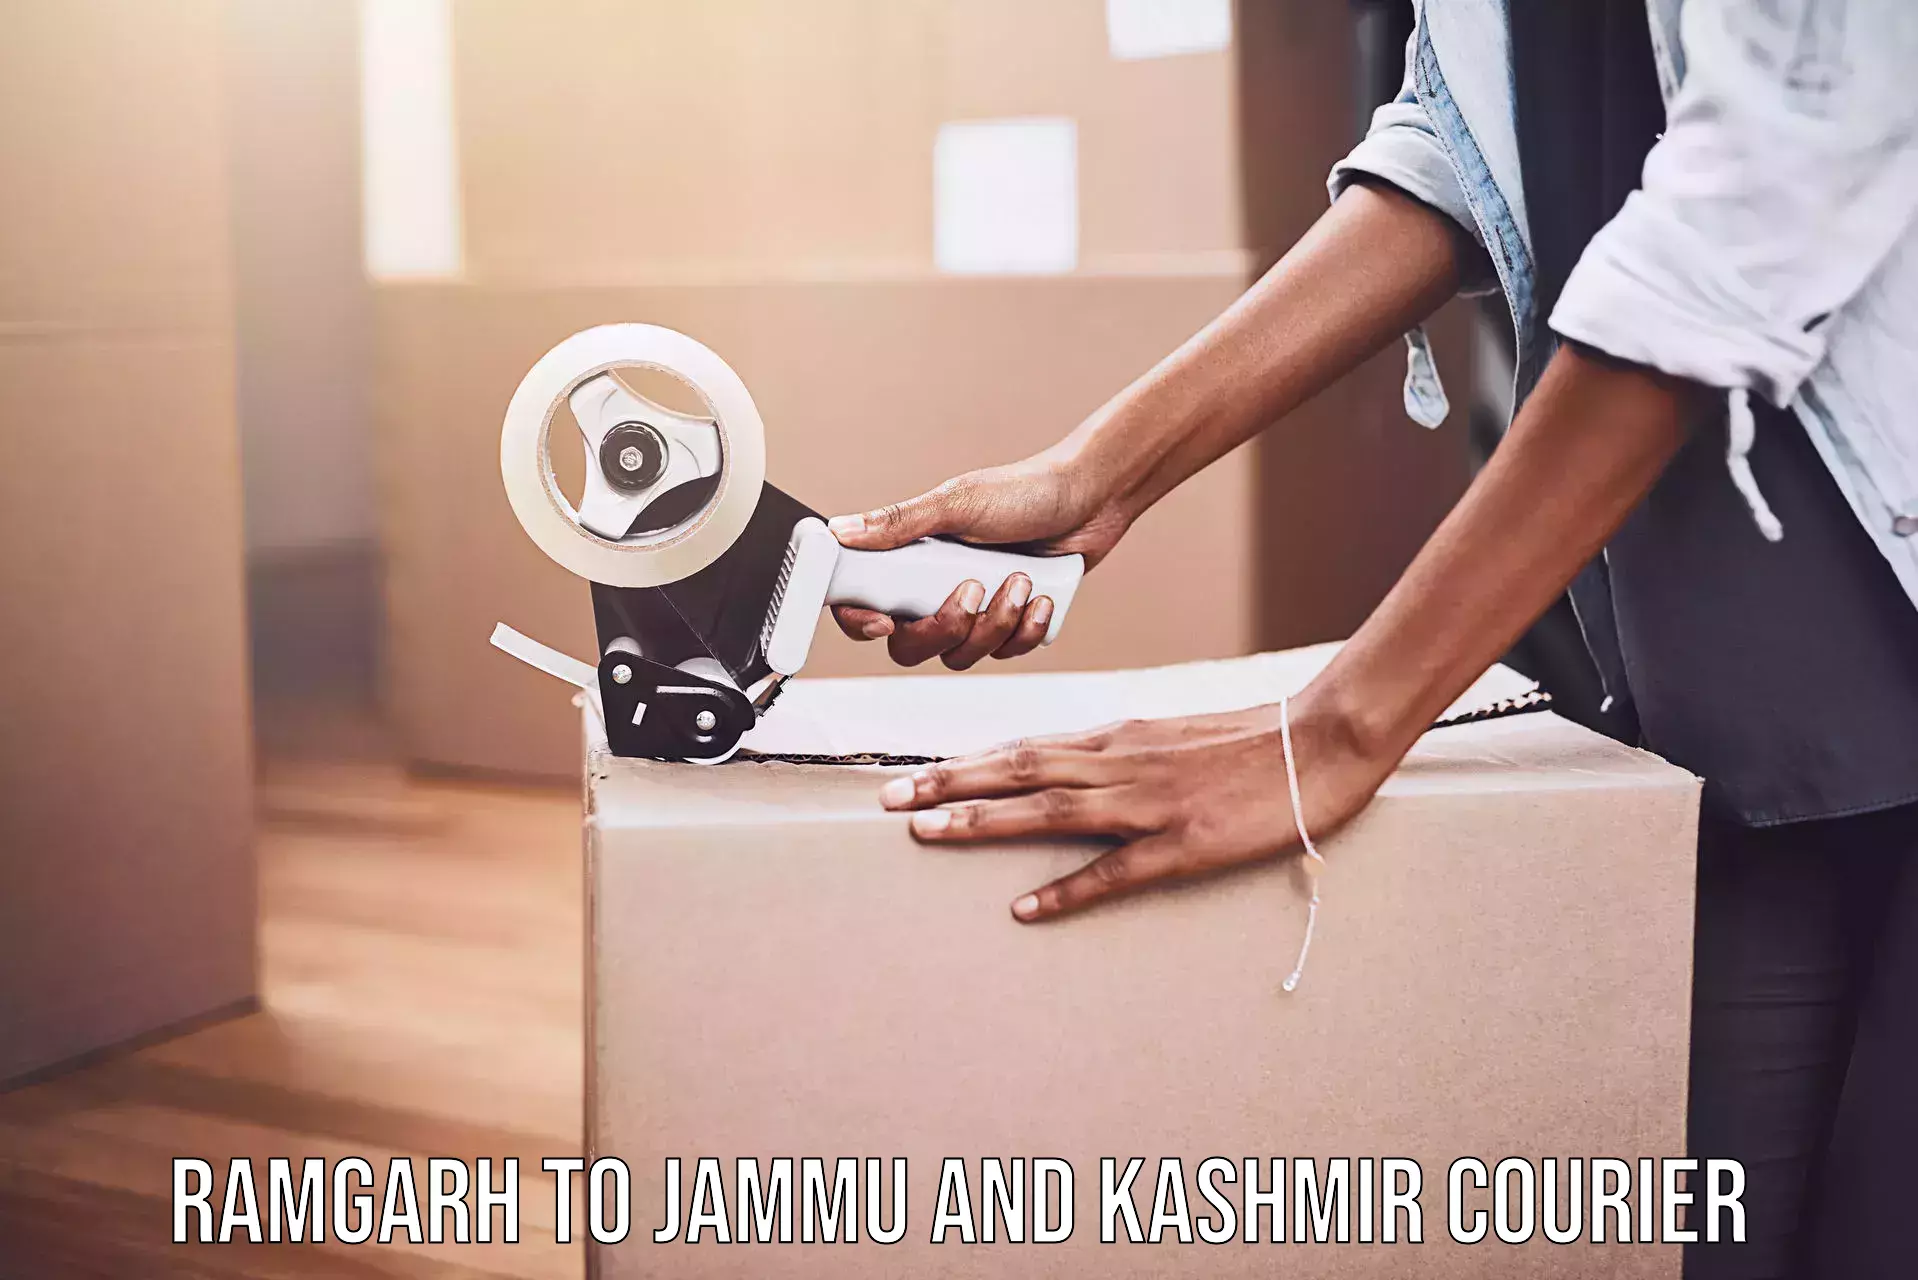 Delivery service partnership Ramgarh to Anantnag